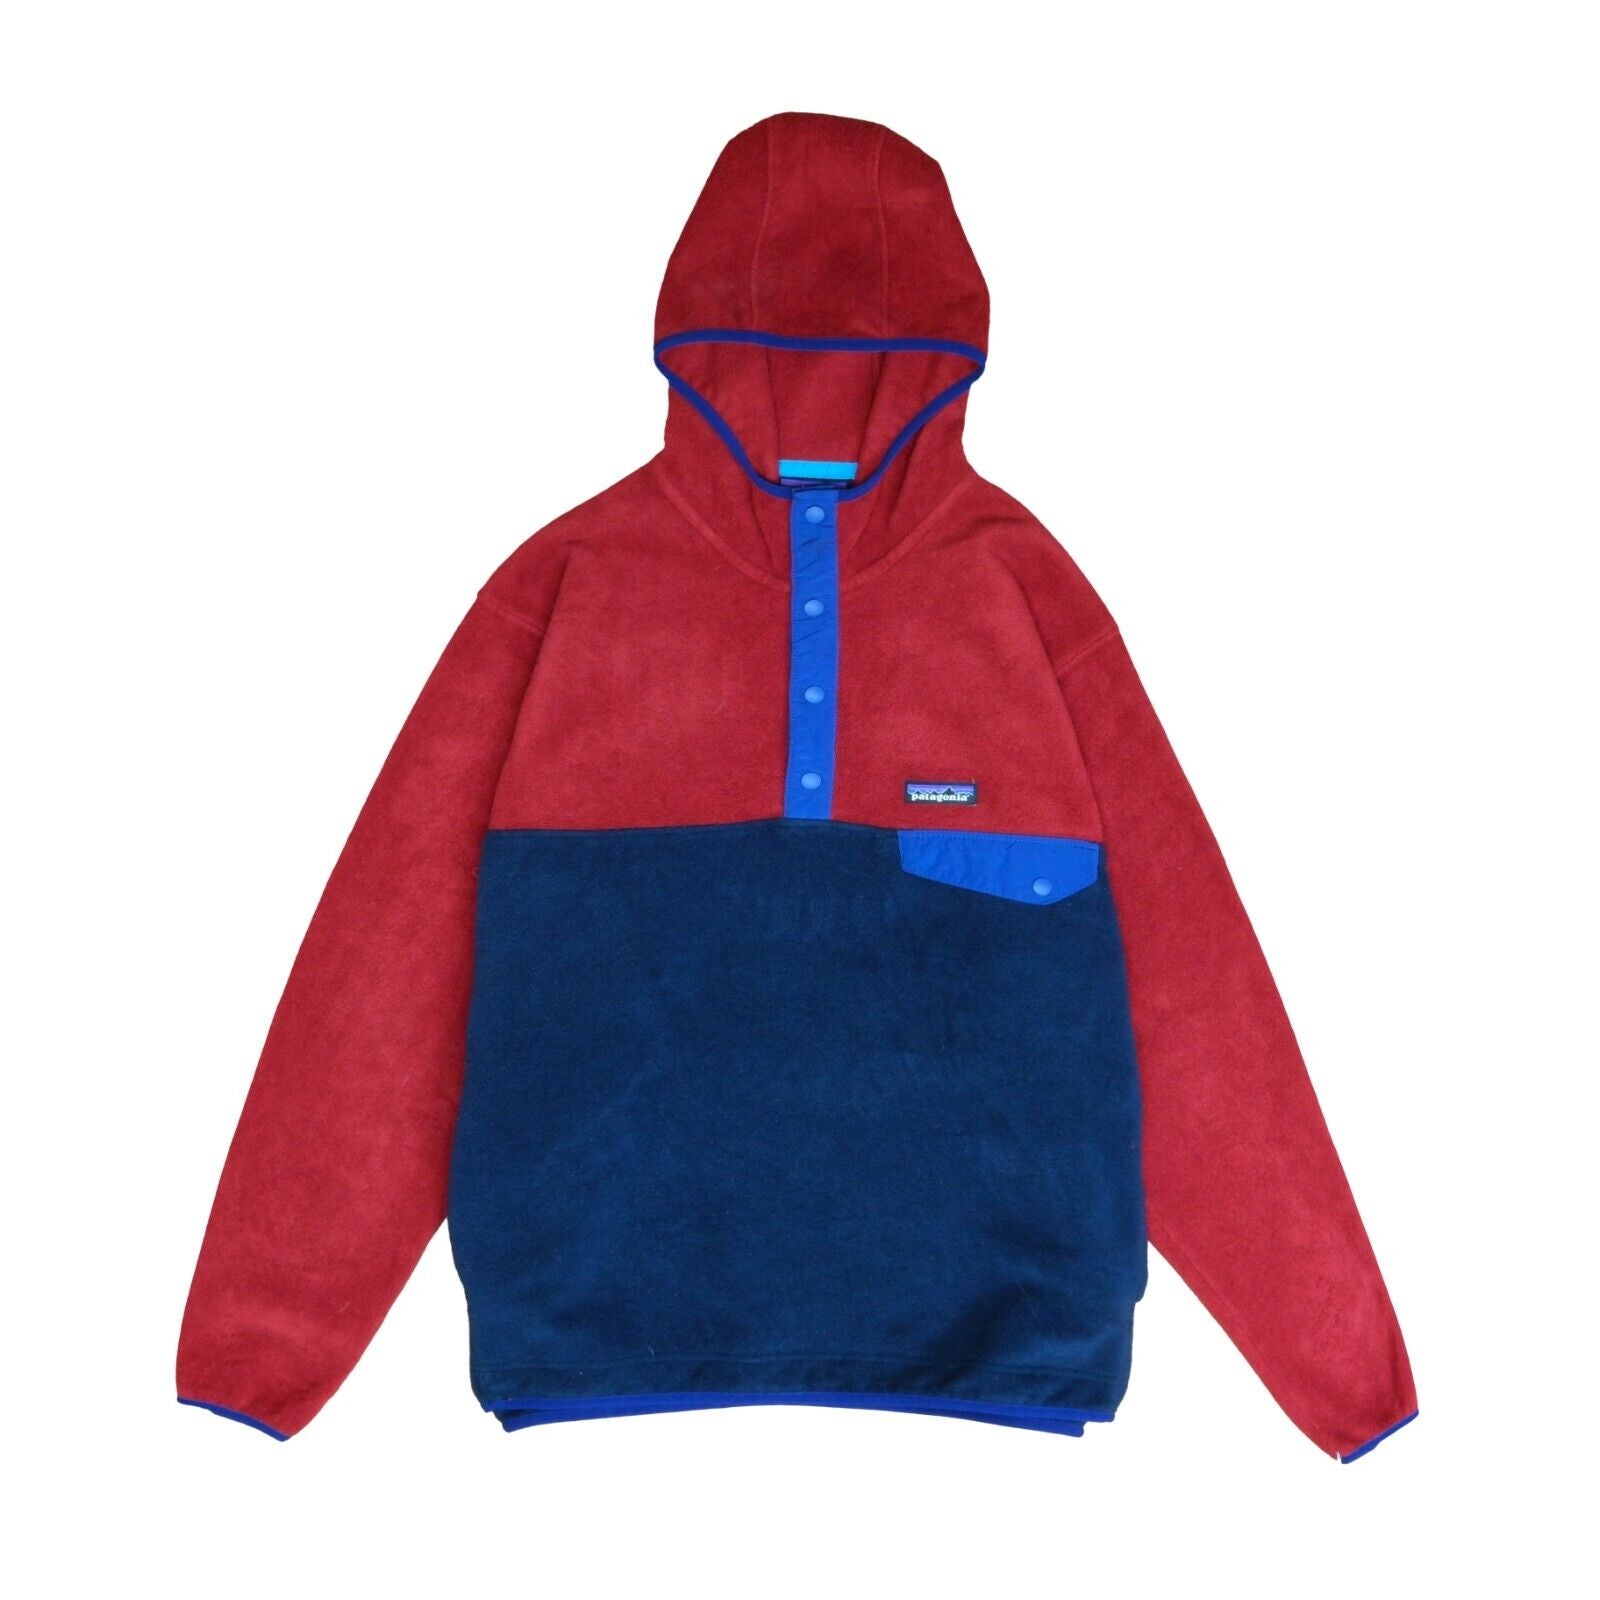 Patagonia Synchilla Snap-T Fleece Jacket Size Large Red Pullover